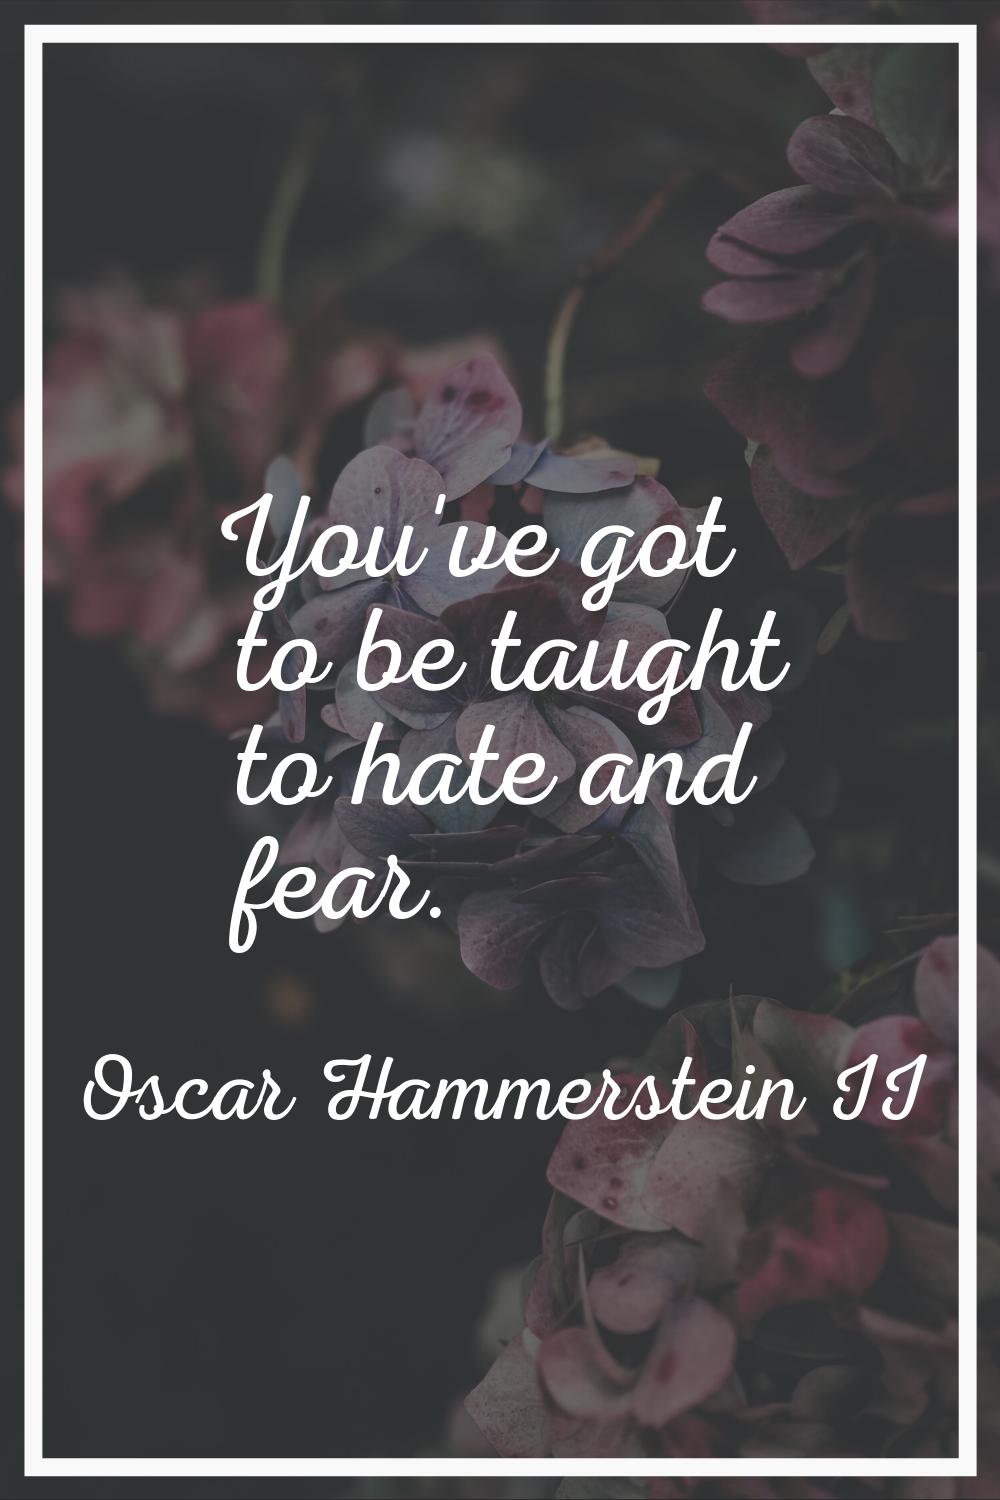 You've got to be taught to hate and fear.